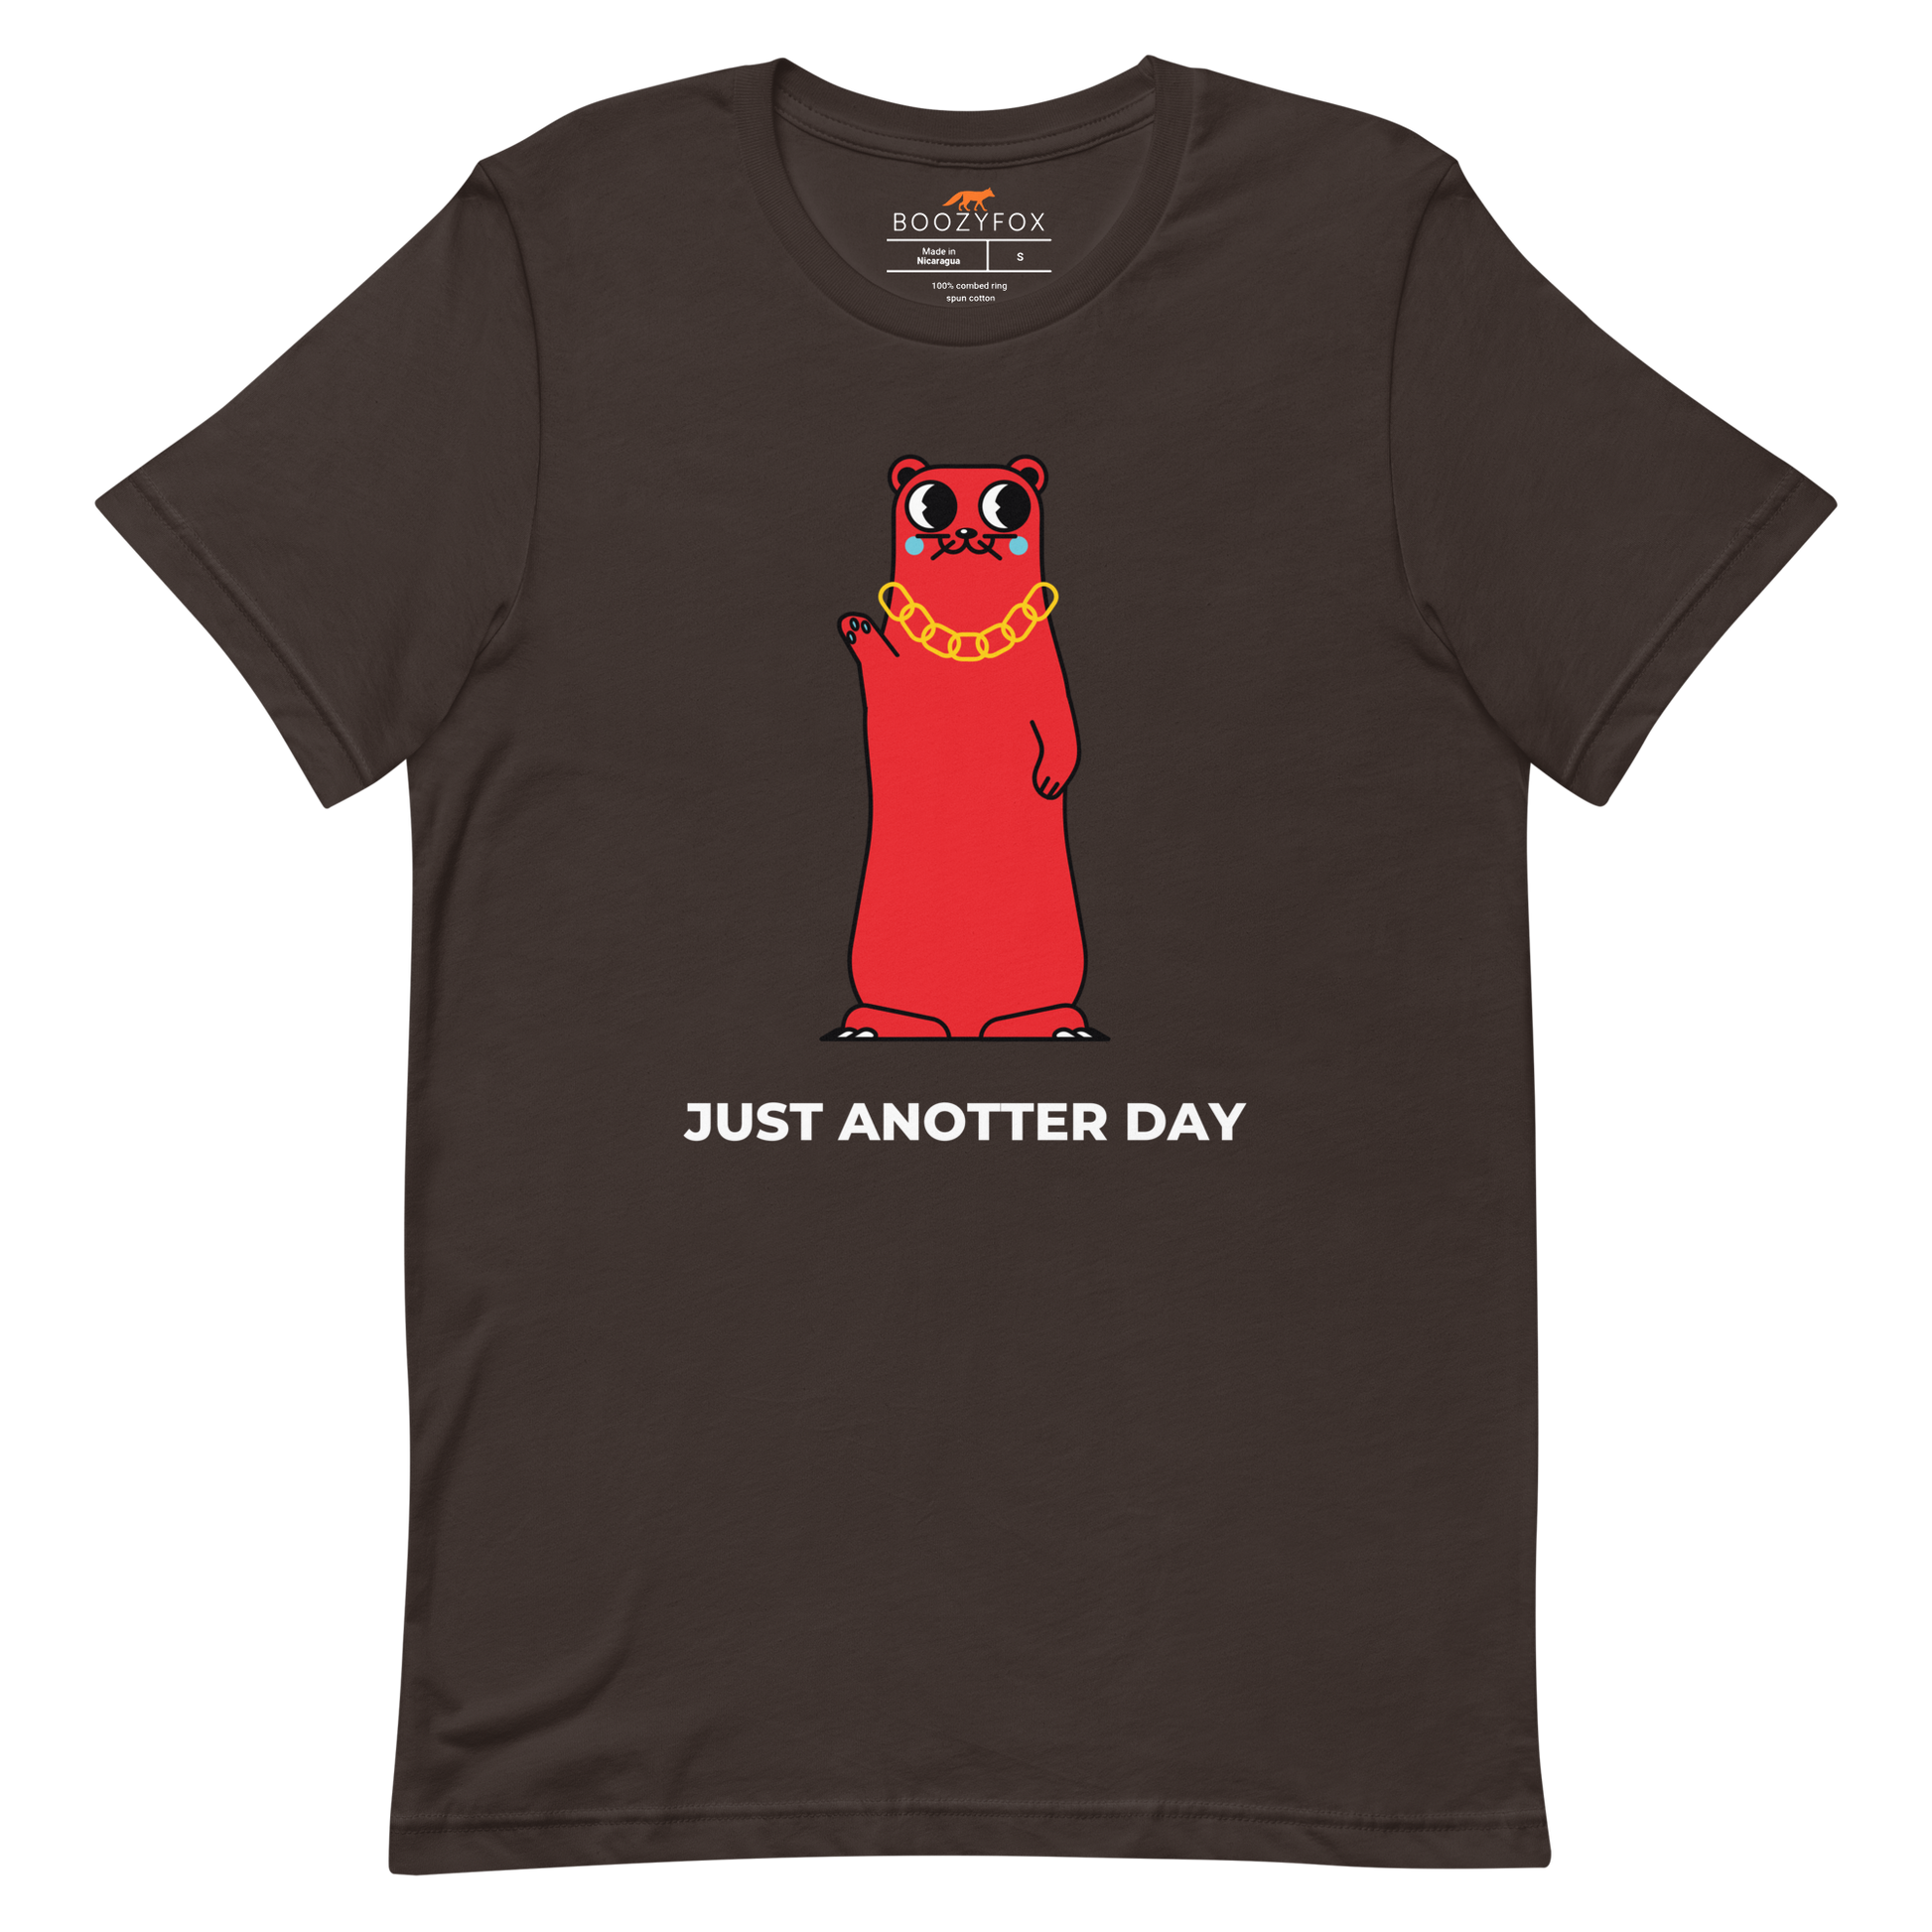 Brown Premium Otter T-Shirt featuring a Just Anotter Day graphic on the chest - Funny Graphic Otter Tees - Boozy Fox